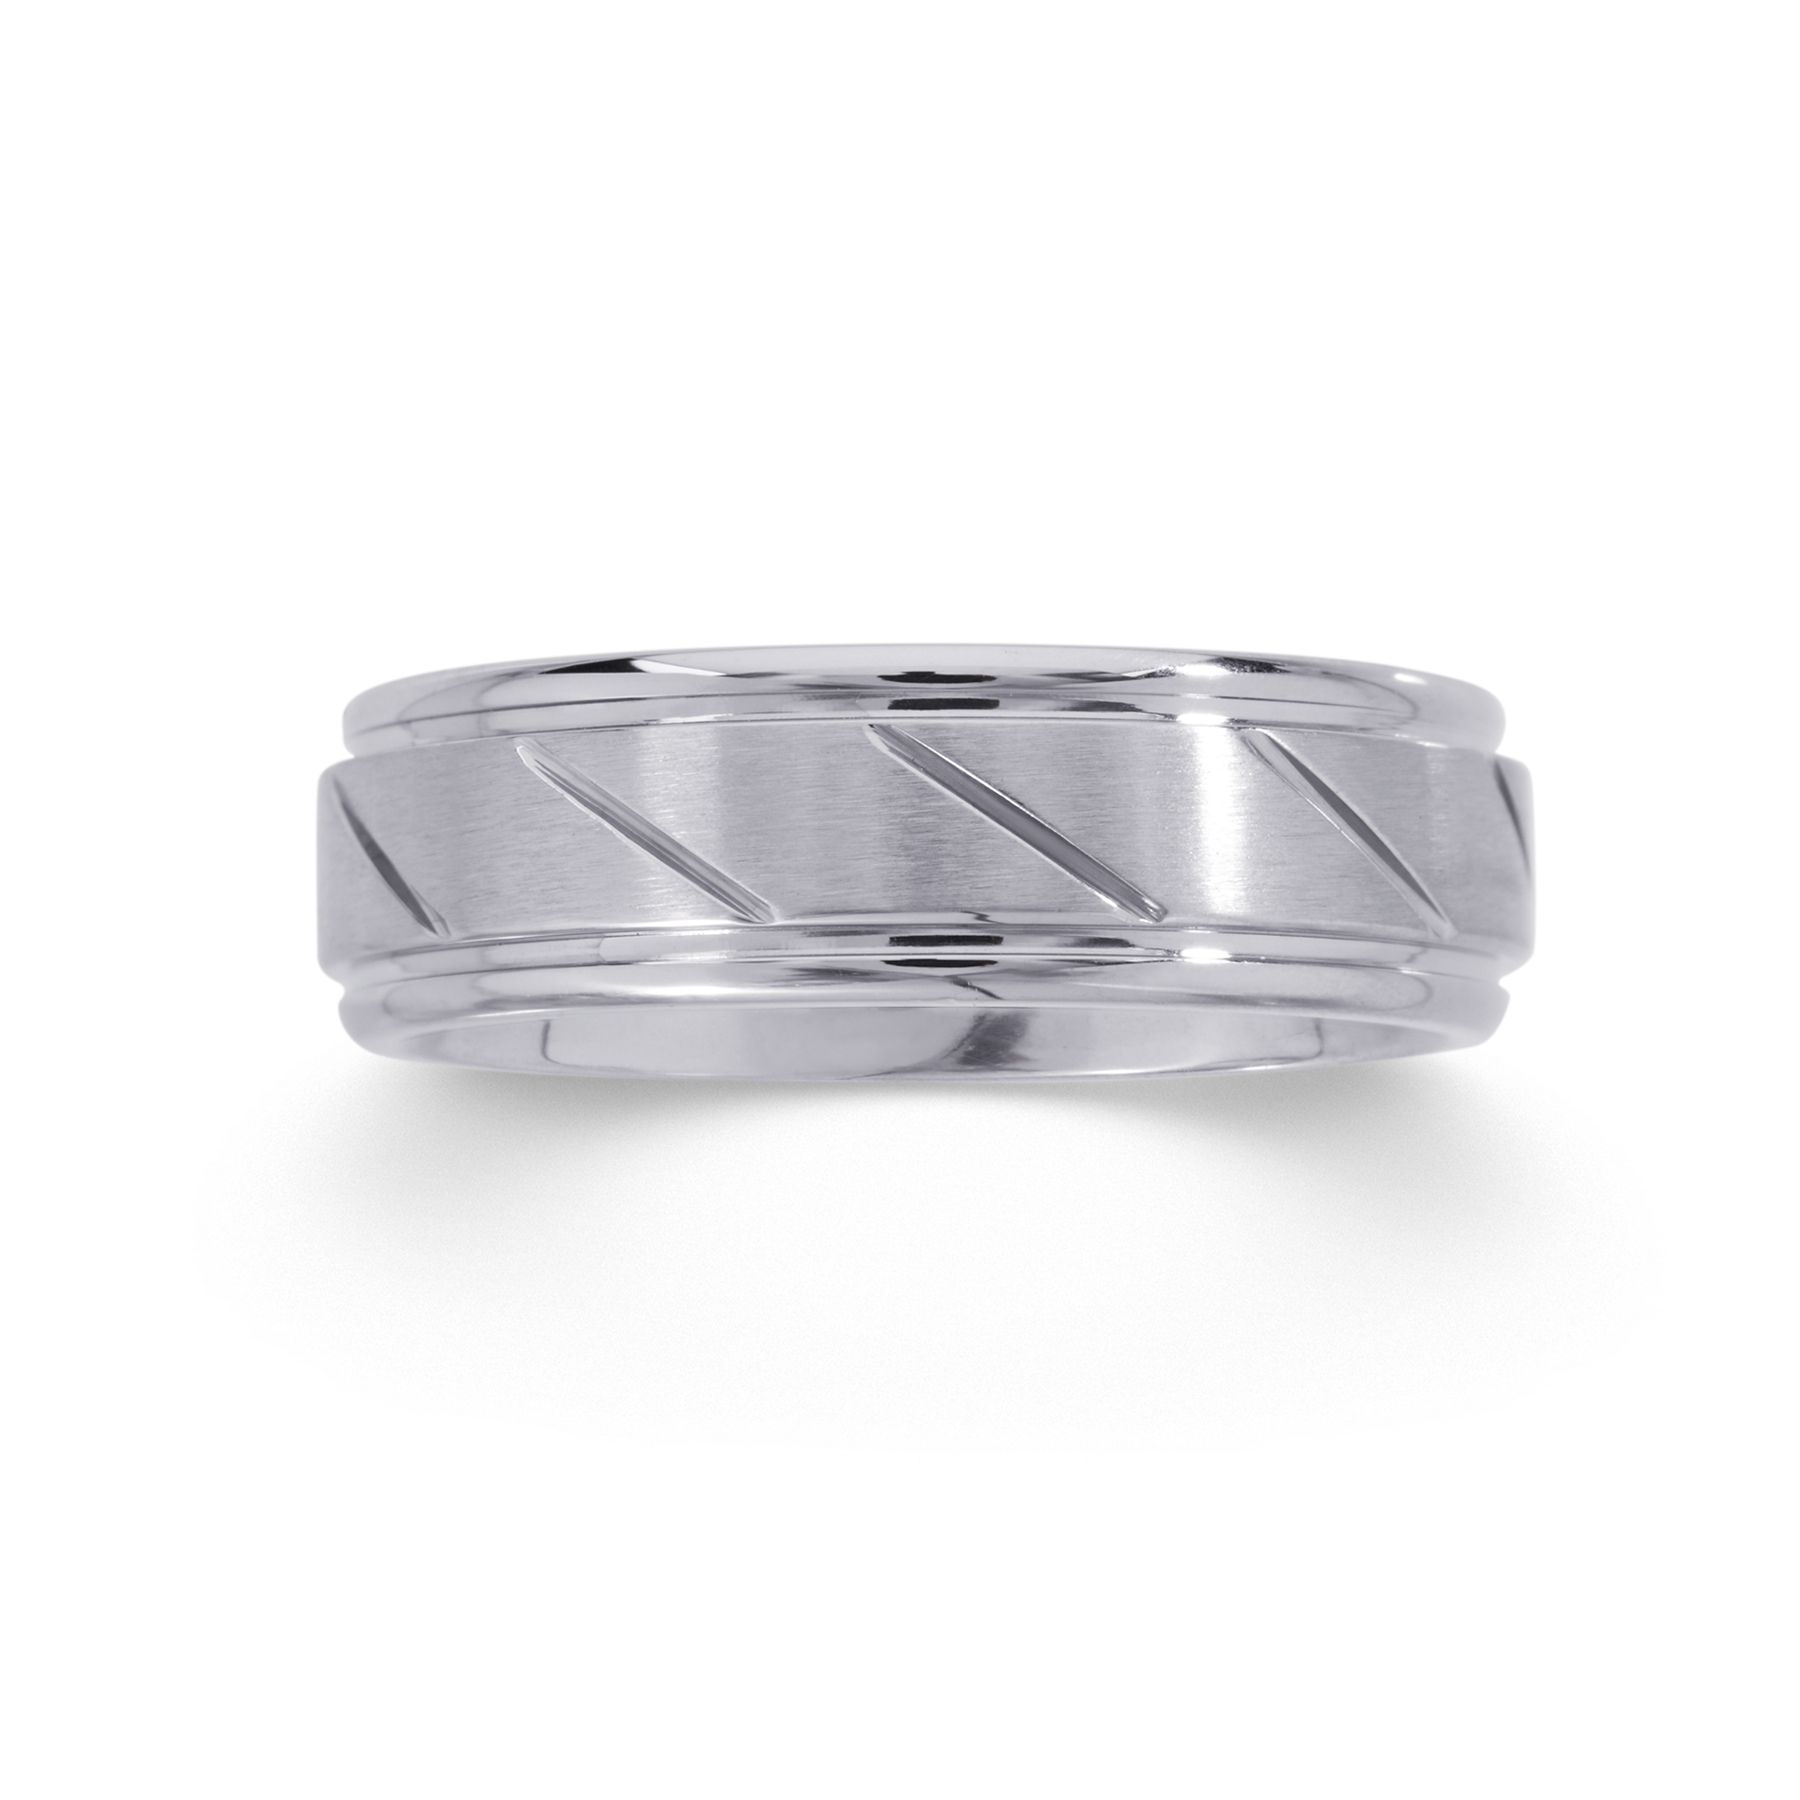 Men's Stainless Steel Wedding Band - Etched - Size 10.5 Only